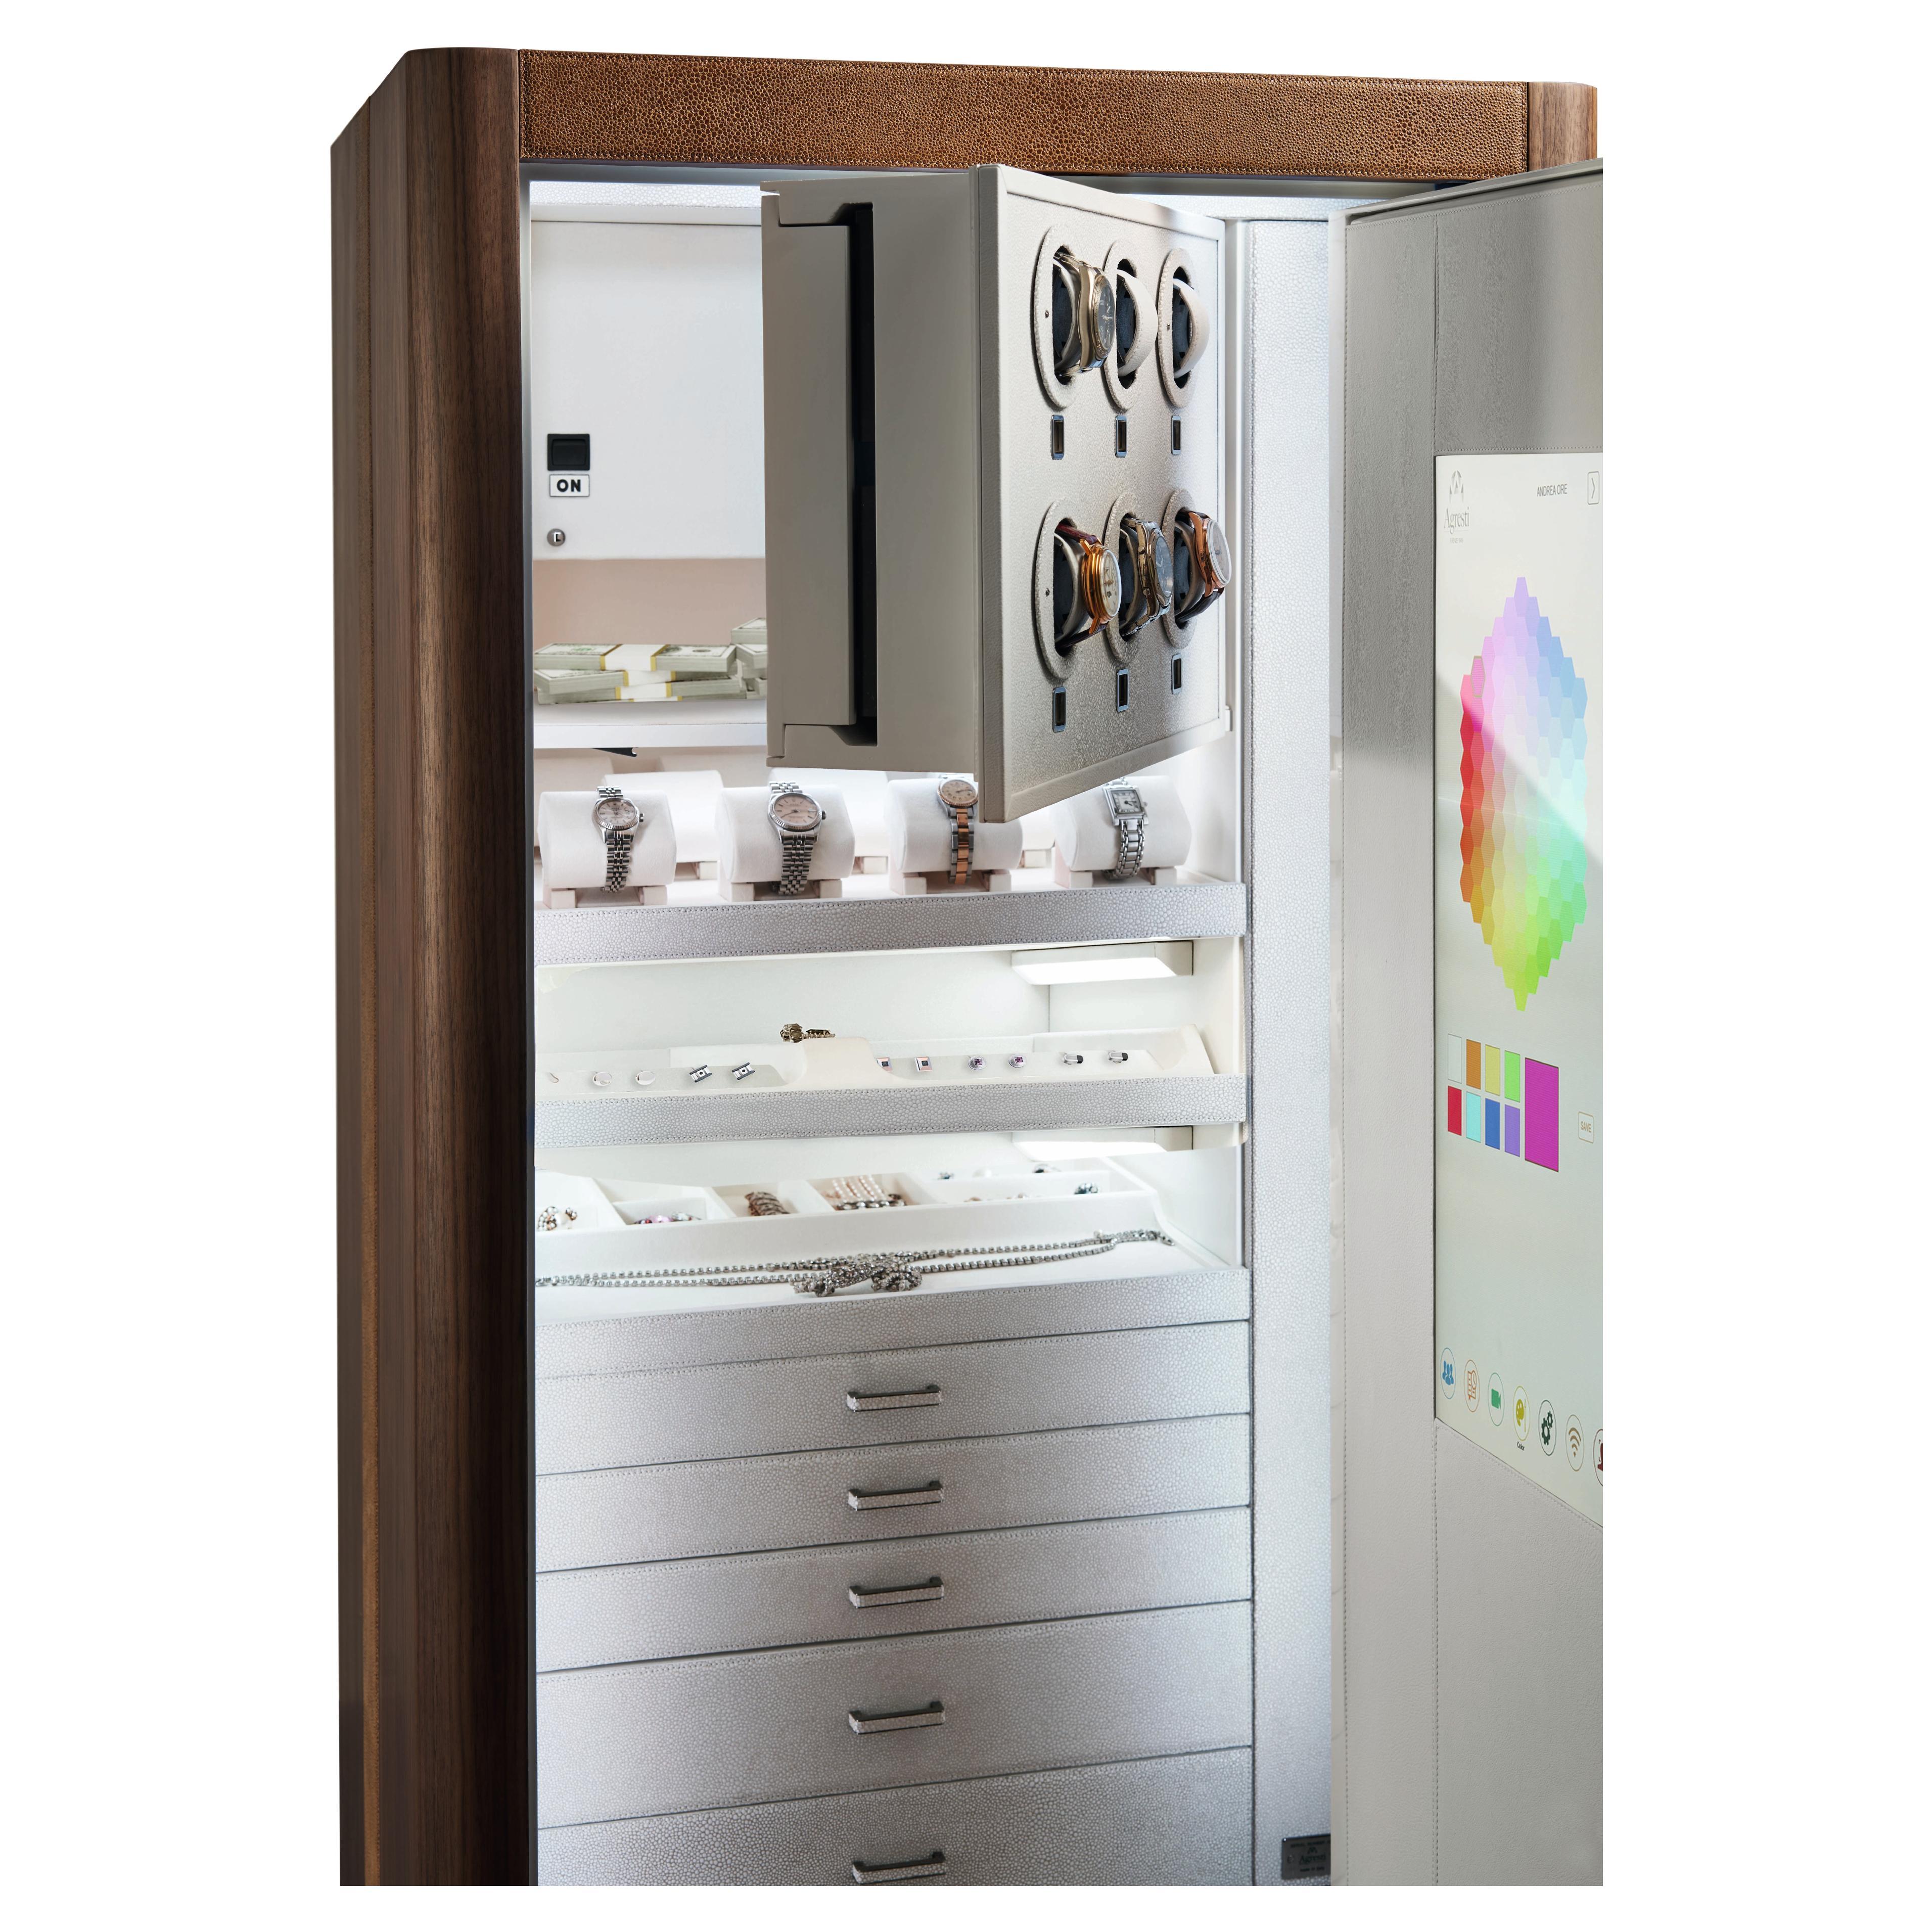 Interactive armored armoire in matte finish Canaletto walnut or polished Ebony, with emergency key. White leather interior with 6 Swiss made watch winders and secret compartment. Ruthenium accessories.

- Opening with biometric device and face